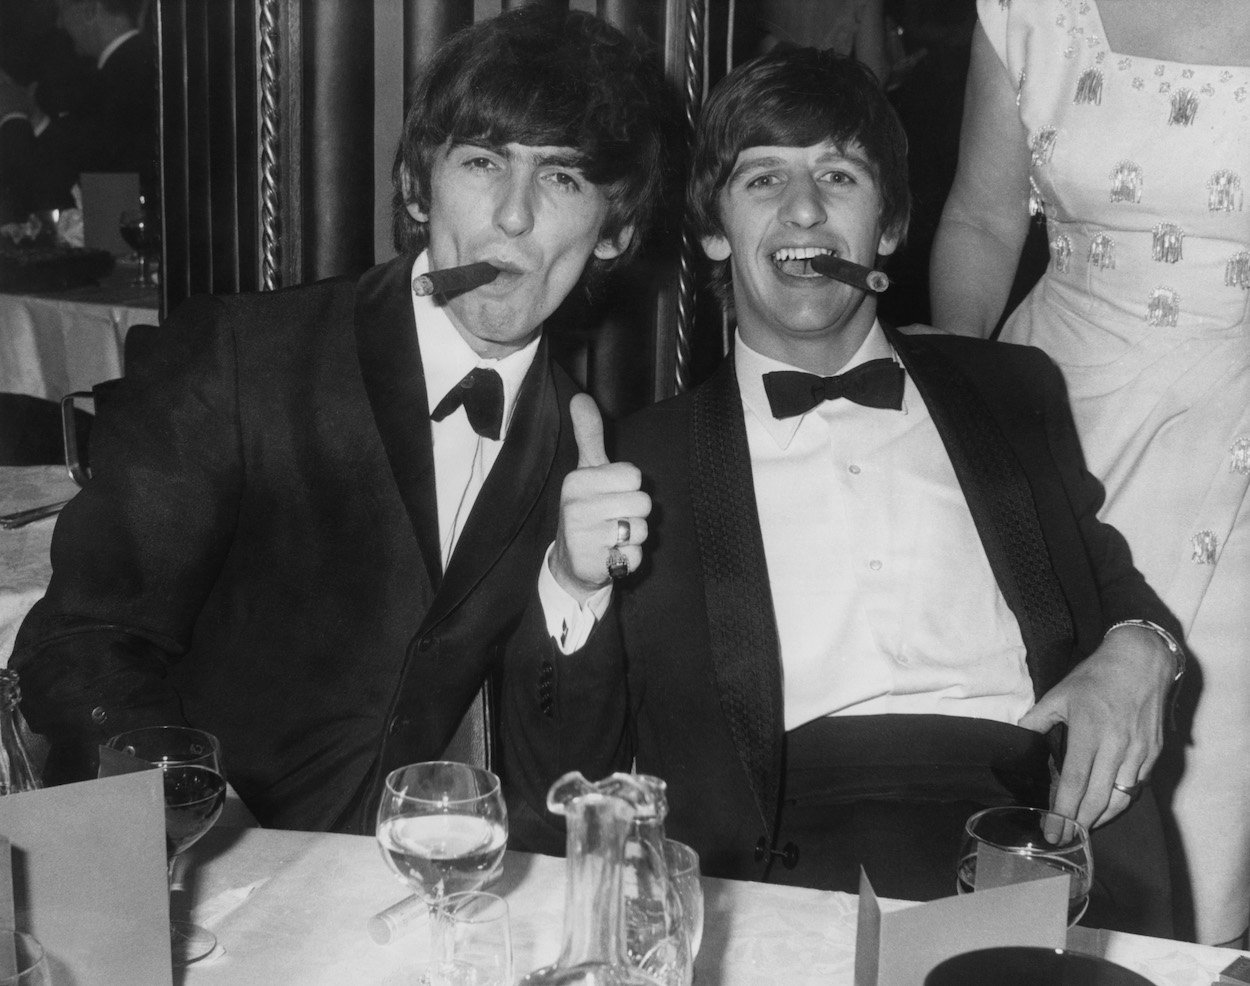 George Harrison (left) and Ringo Starr at a 1964 event. George was impressed by Ringo Starr when he heard him play even though he didn't know his name.